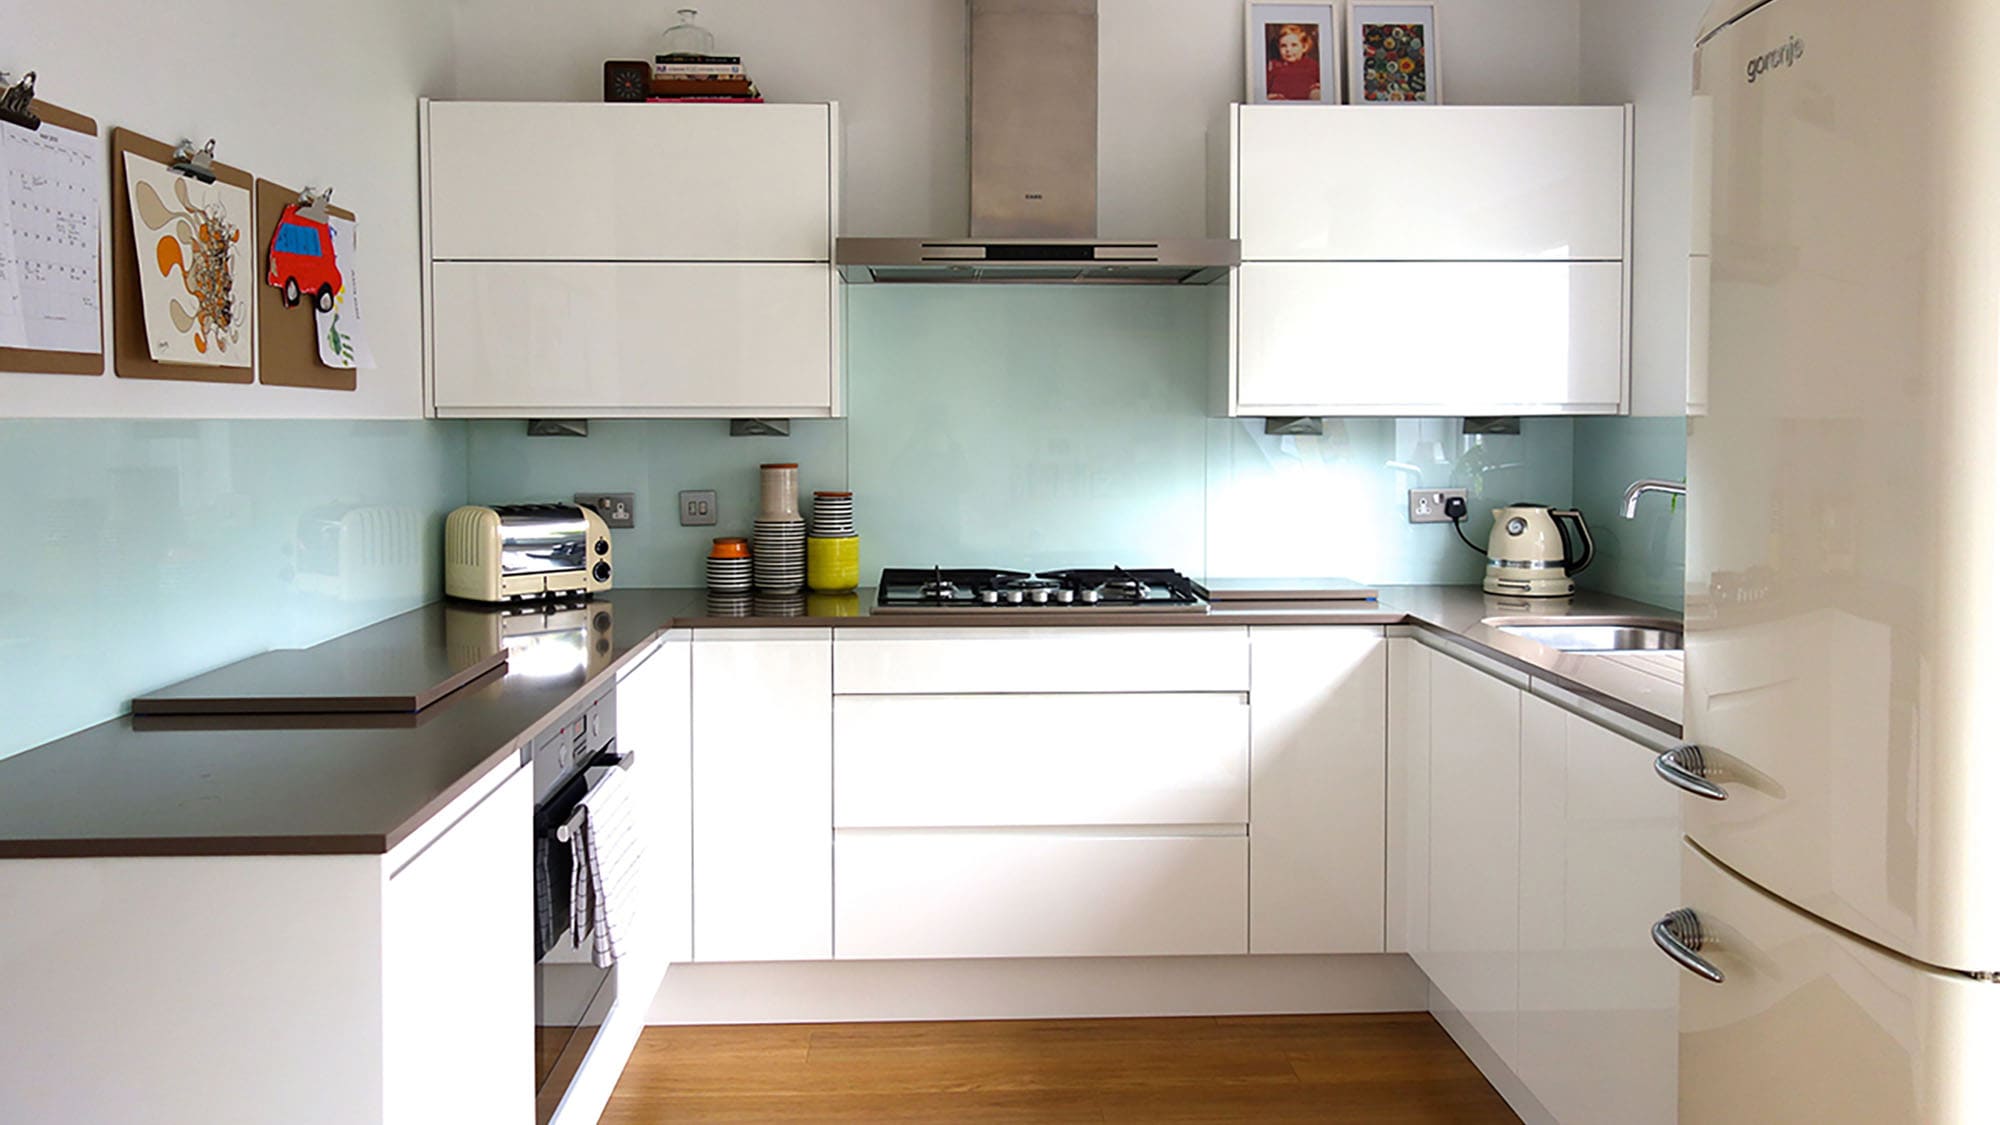 5 Cool Design Tips For Small Kitchens, Maxine Brady